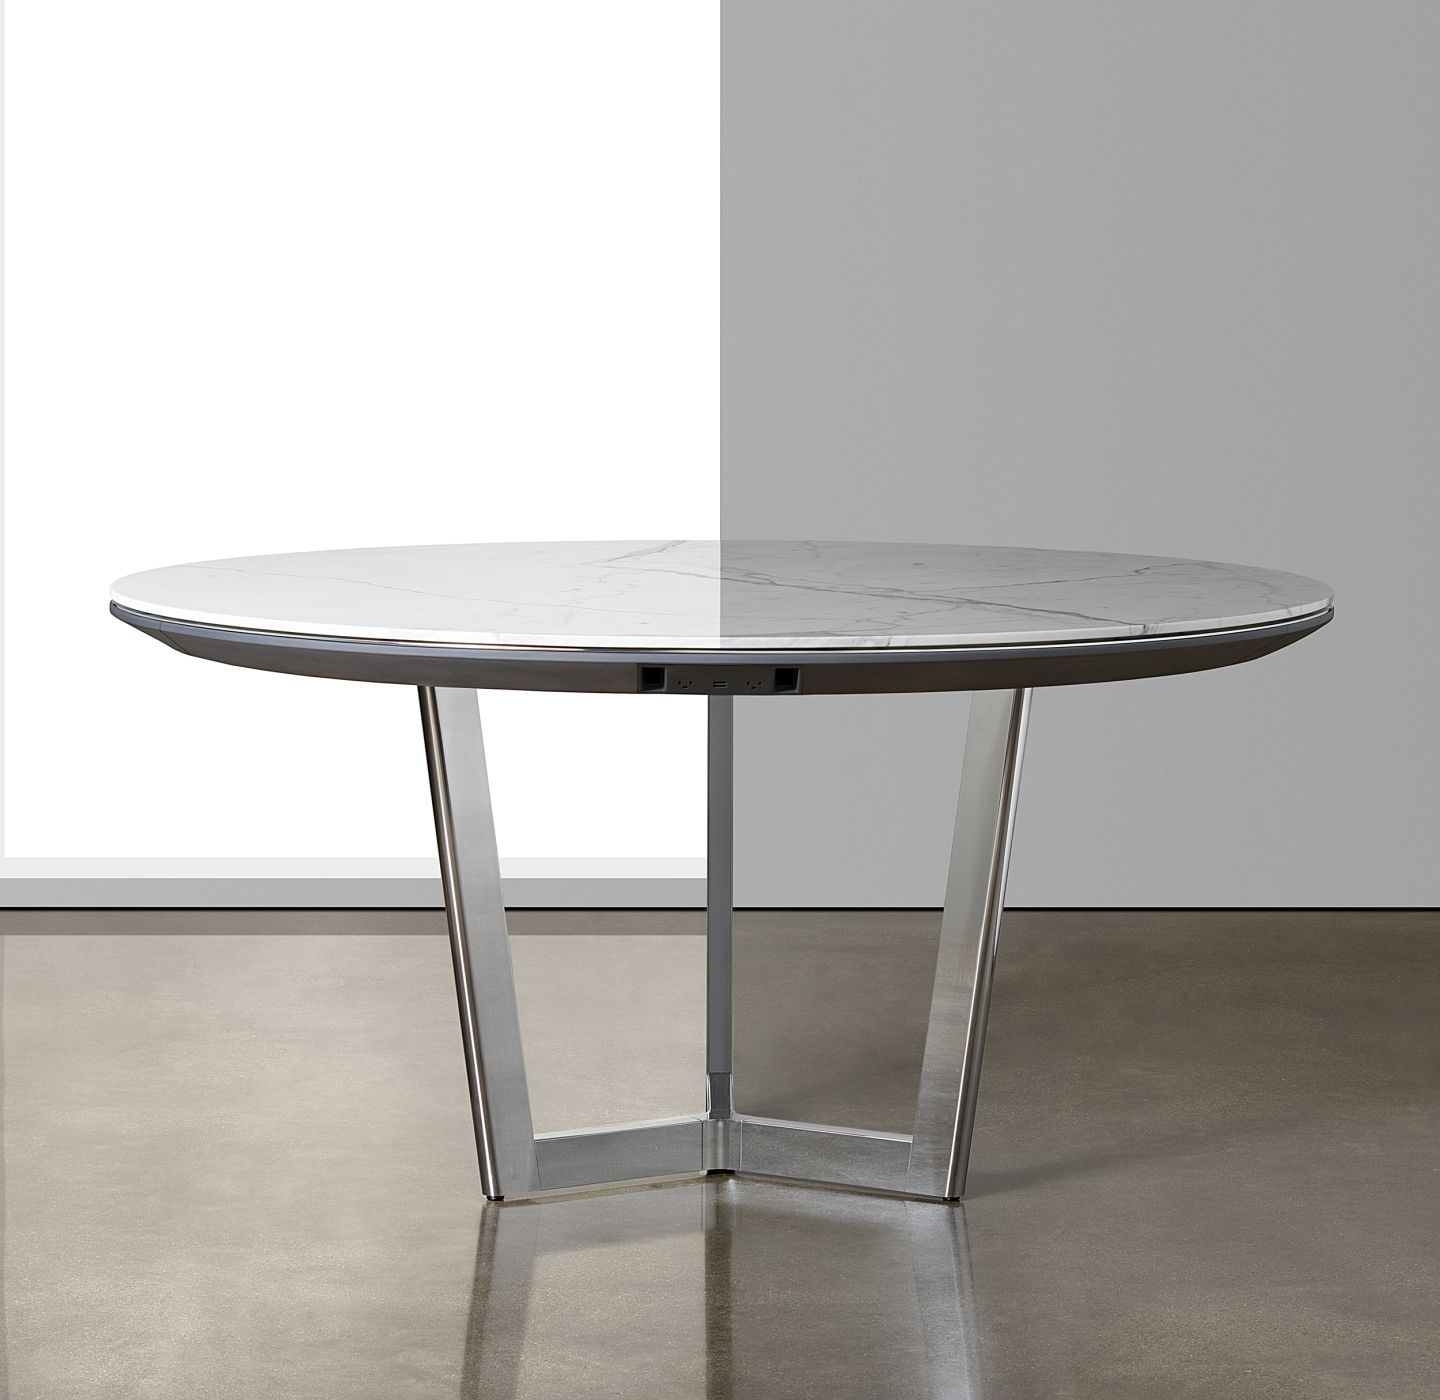 Halo tables are available in any shape and size to perfectly fit your space.